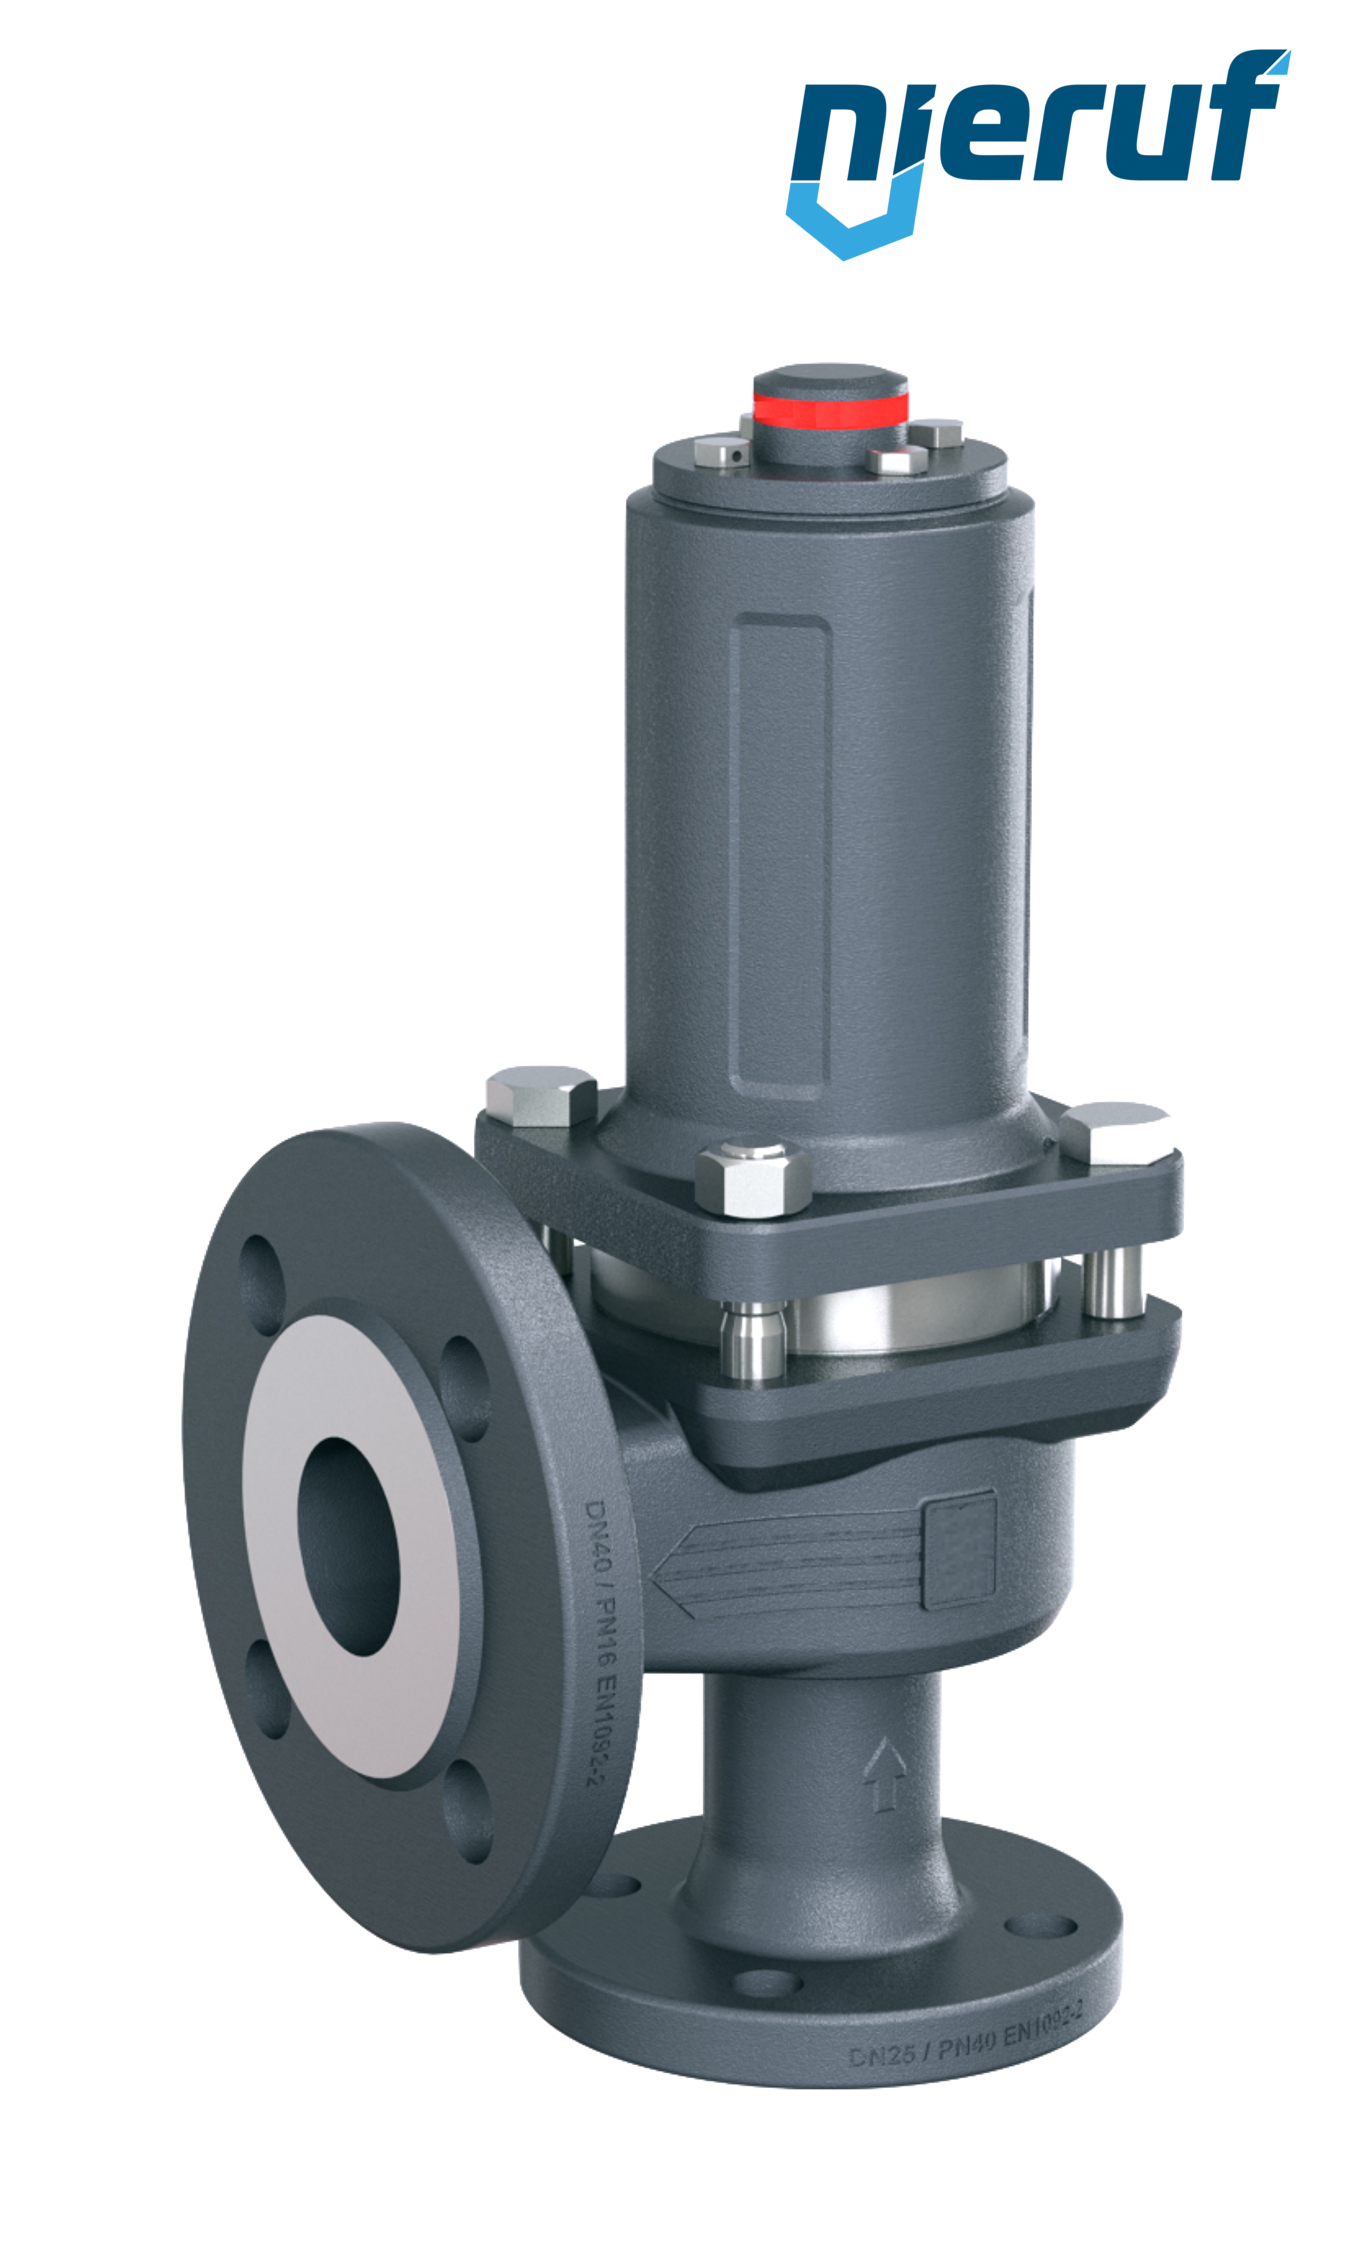 flange-safety valve DN50/DN80 SF06, gastight bonnet & stainless steel bonnet metal, without lifting device